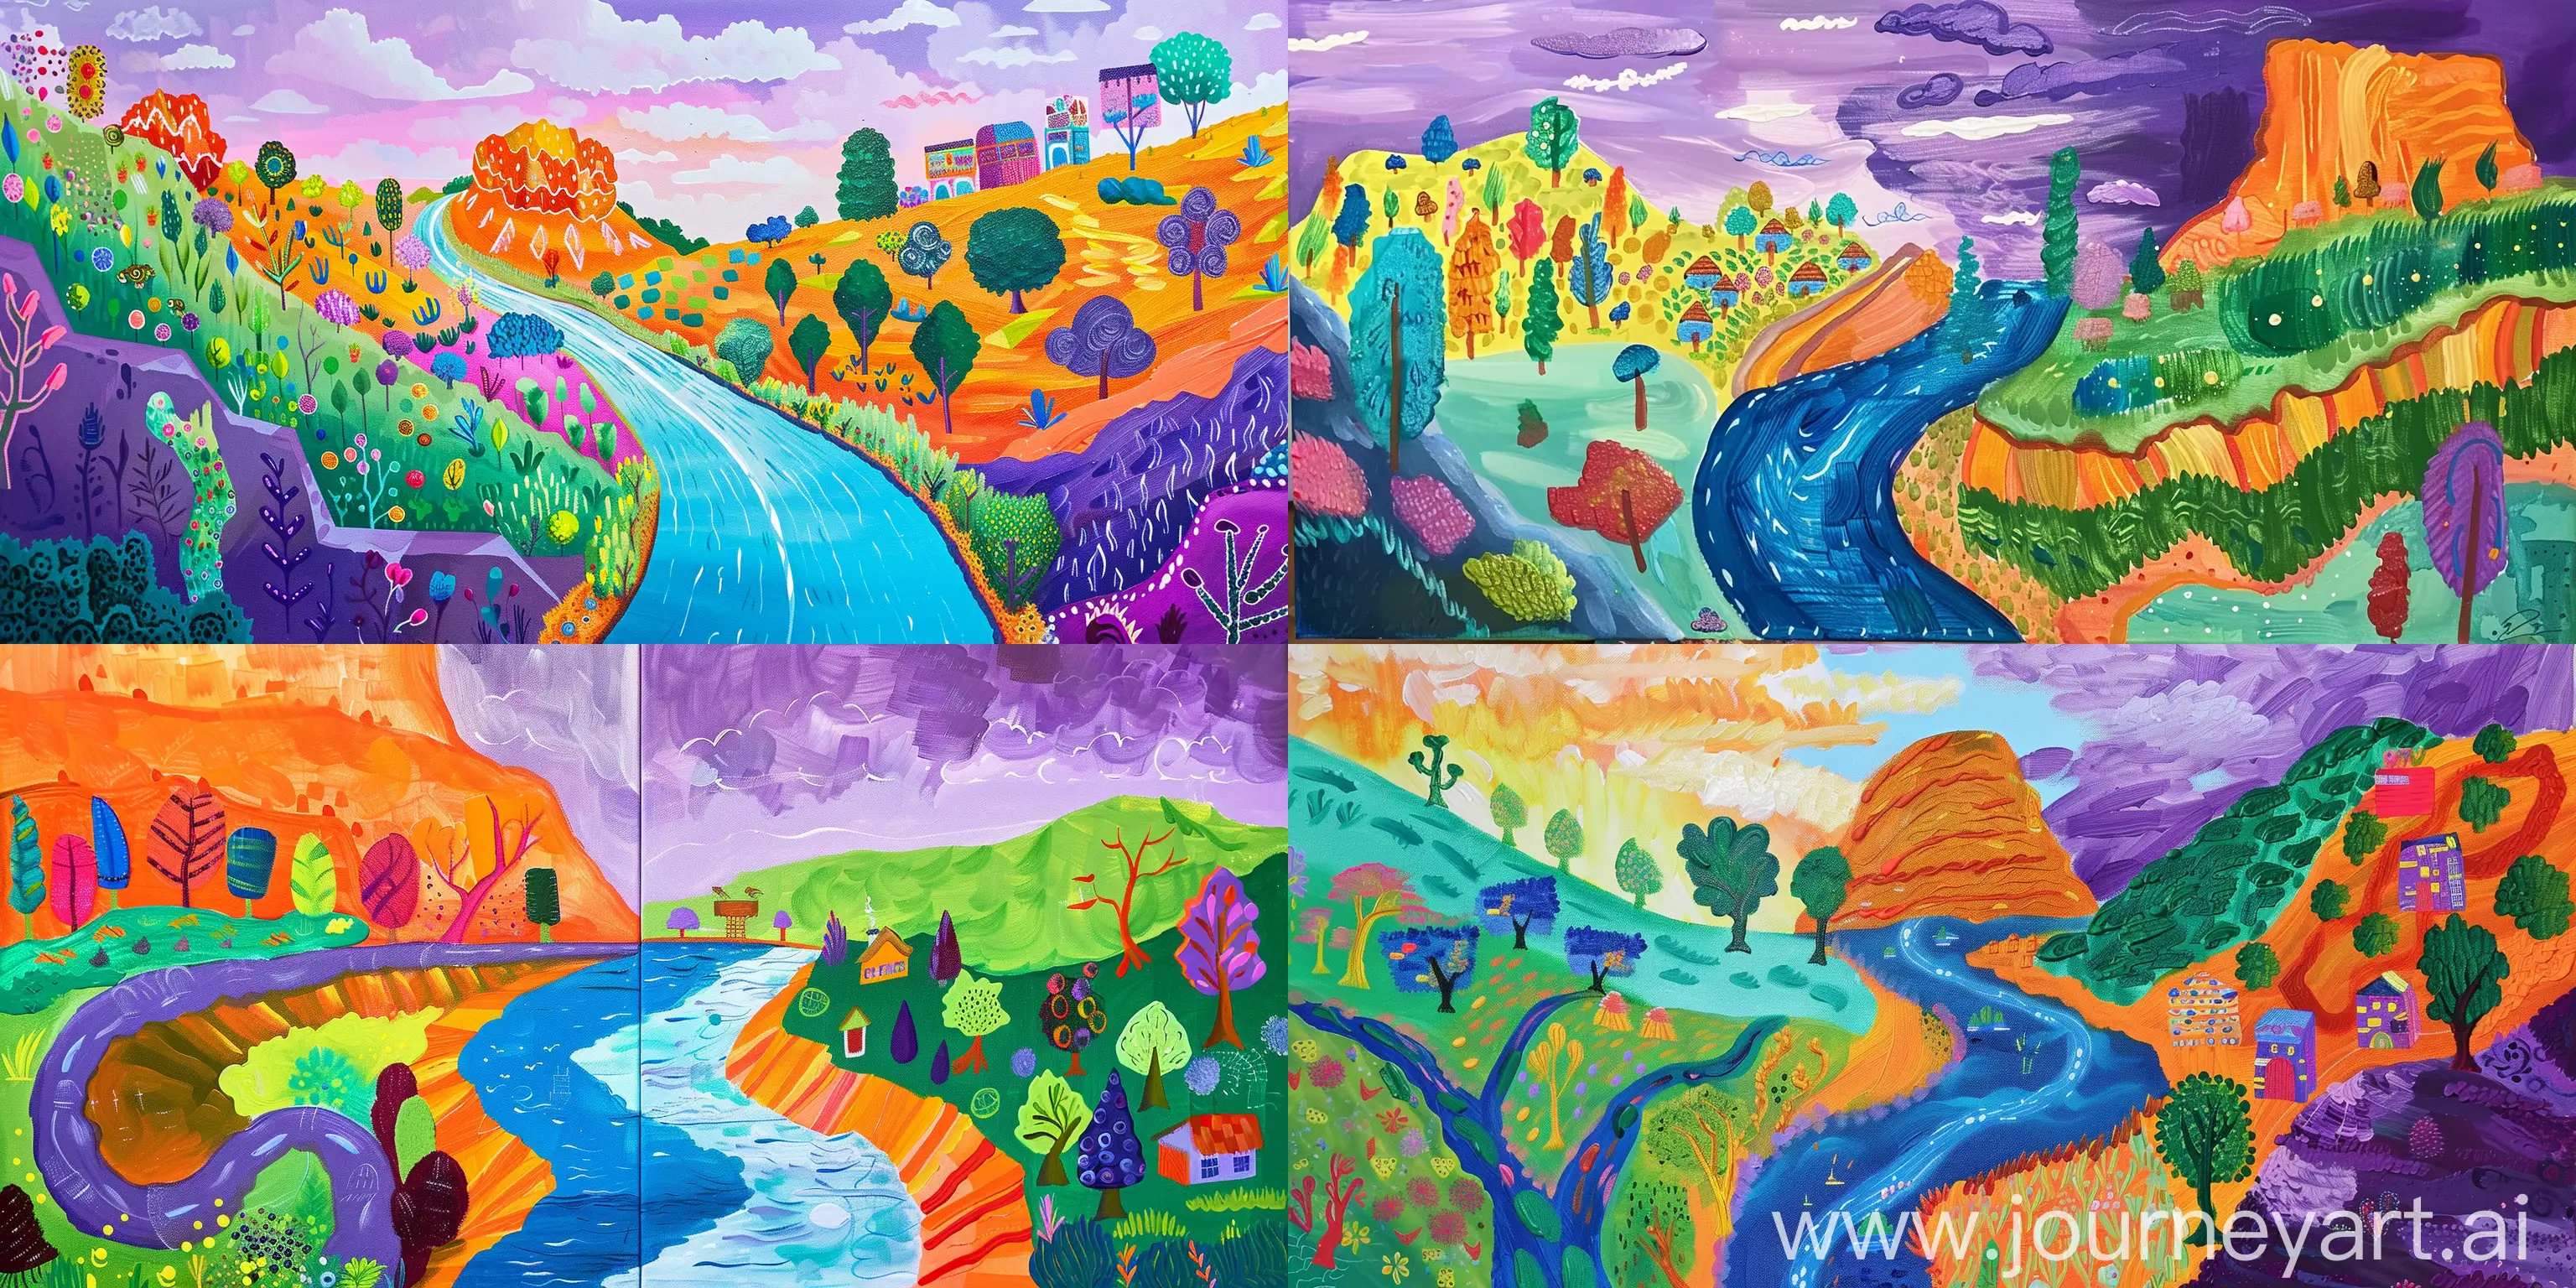 Create a vibrant and colorful painting inspired by the style of "Nichols Canyon" with the same set of colors. Imagine a landscape scene that is expressive and somewhat abstract, using bold and bright colors throughout. Picture a winding river or road as the focal point of the composition, surrounded by various forms of vegetation and trees. On one side of the river, include a steep green hill or cliff with trees or bushes, while the other side features a flatter landscape with small colorful buildings resembling a village. Incorporate a large, rounded hill or mountain in the background, painted in a warm orange hue. Use a mix of purple and blue for the sky, with white strokes to represent clouds. Experiment with patterns and textures to add depth and visual interest to the painting. Remember to maintain the whimsical and dream-like quality of the original artwork while infusing your own creativity and interpretation. Use acrylic paint on a canvas to capture the essence of the style and create a unique piece inspired by "Nichols Canyon." --ar 6:3 --c 5